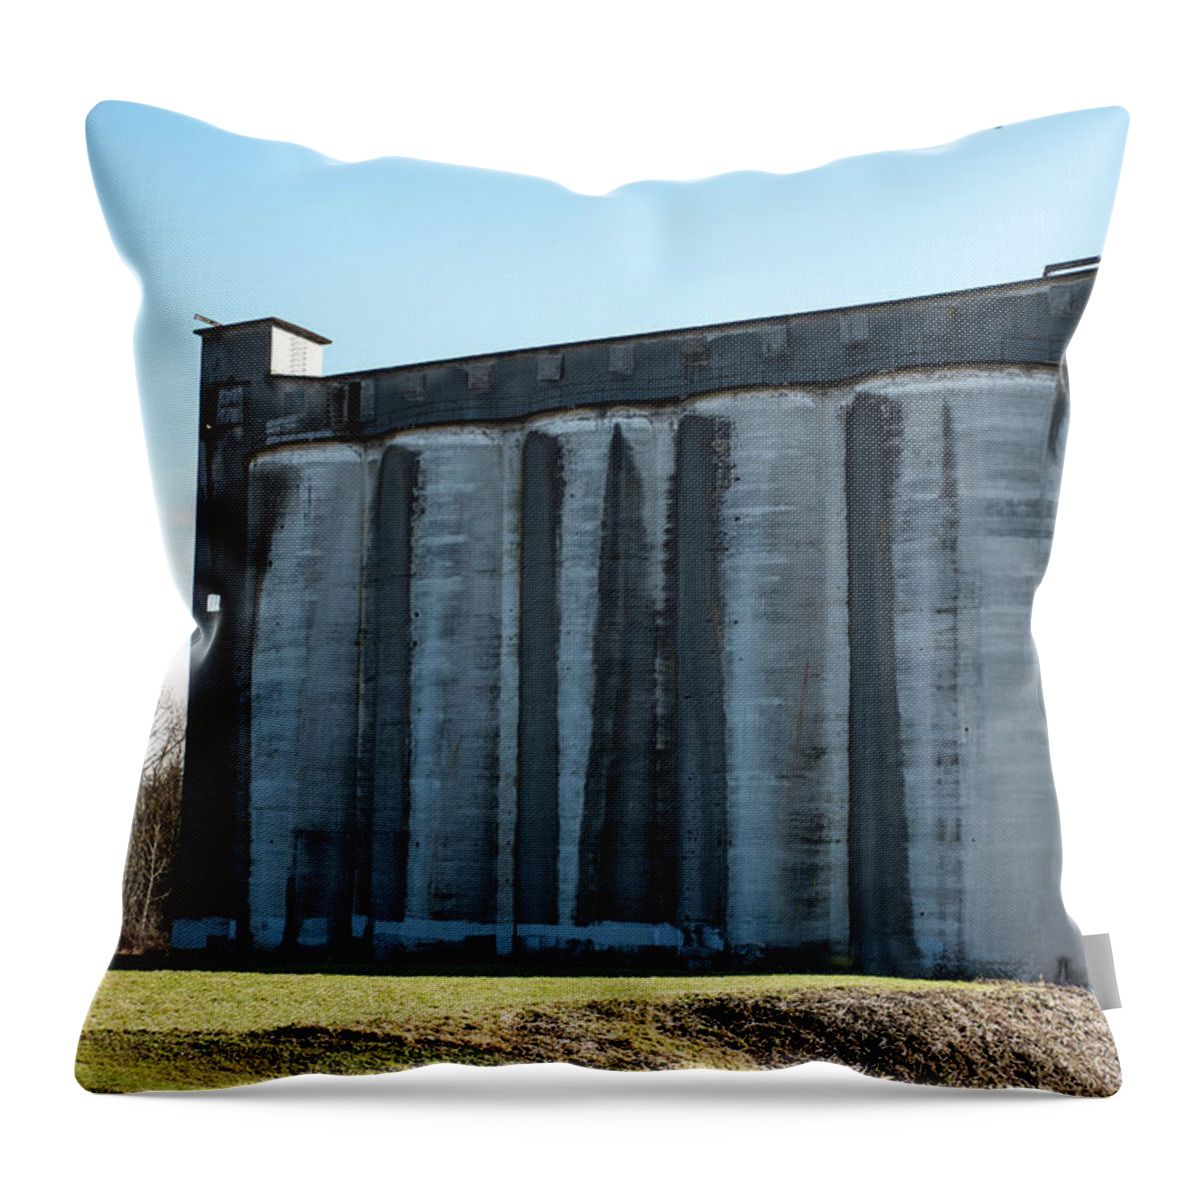 Guardian Silos Throw Pillow featuring the photograph Guardian Silos by Tom Cochran